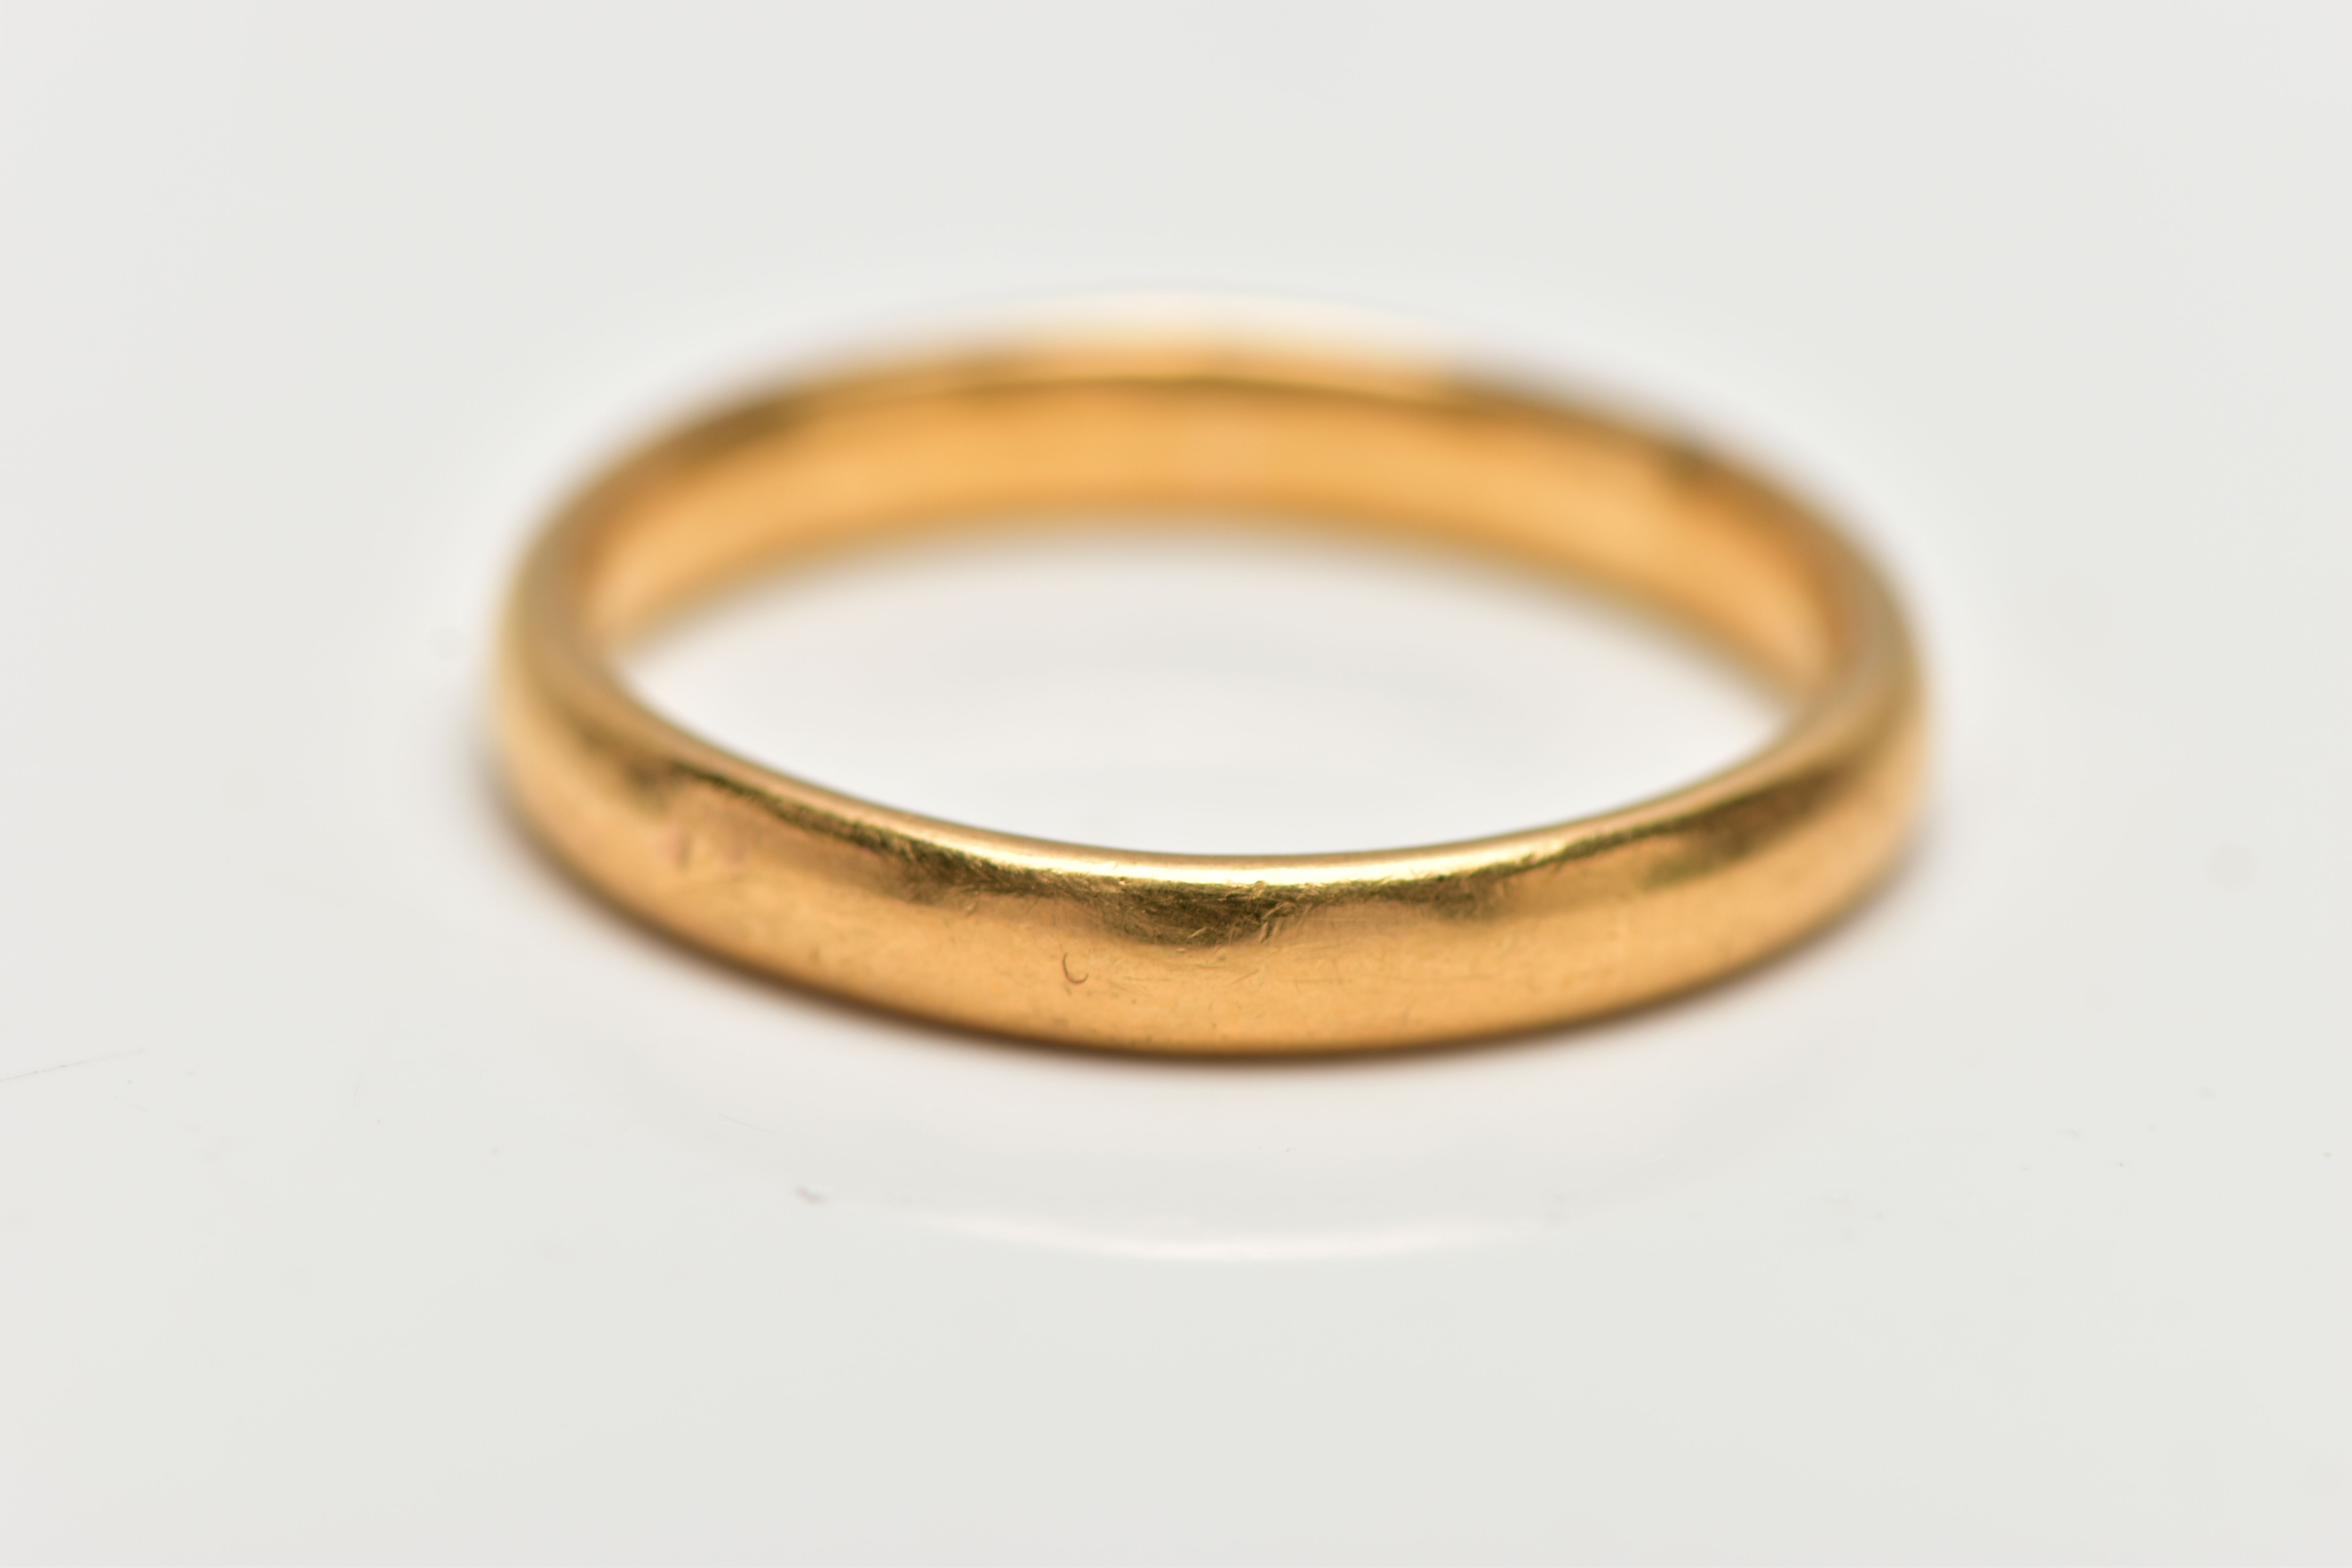 A 22CT YELLOW GOLD BAND RING, polished band, approximate band width 3.2mm, hallmarked 22ct London - Image 2 of 2